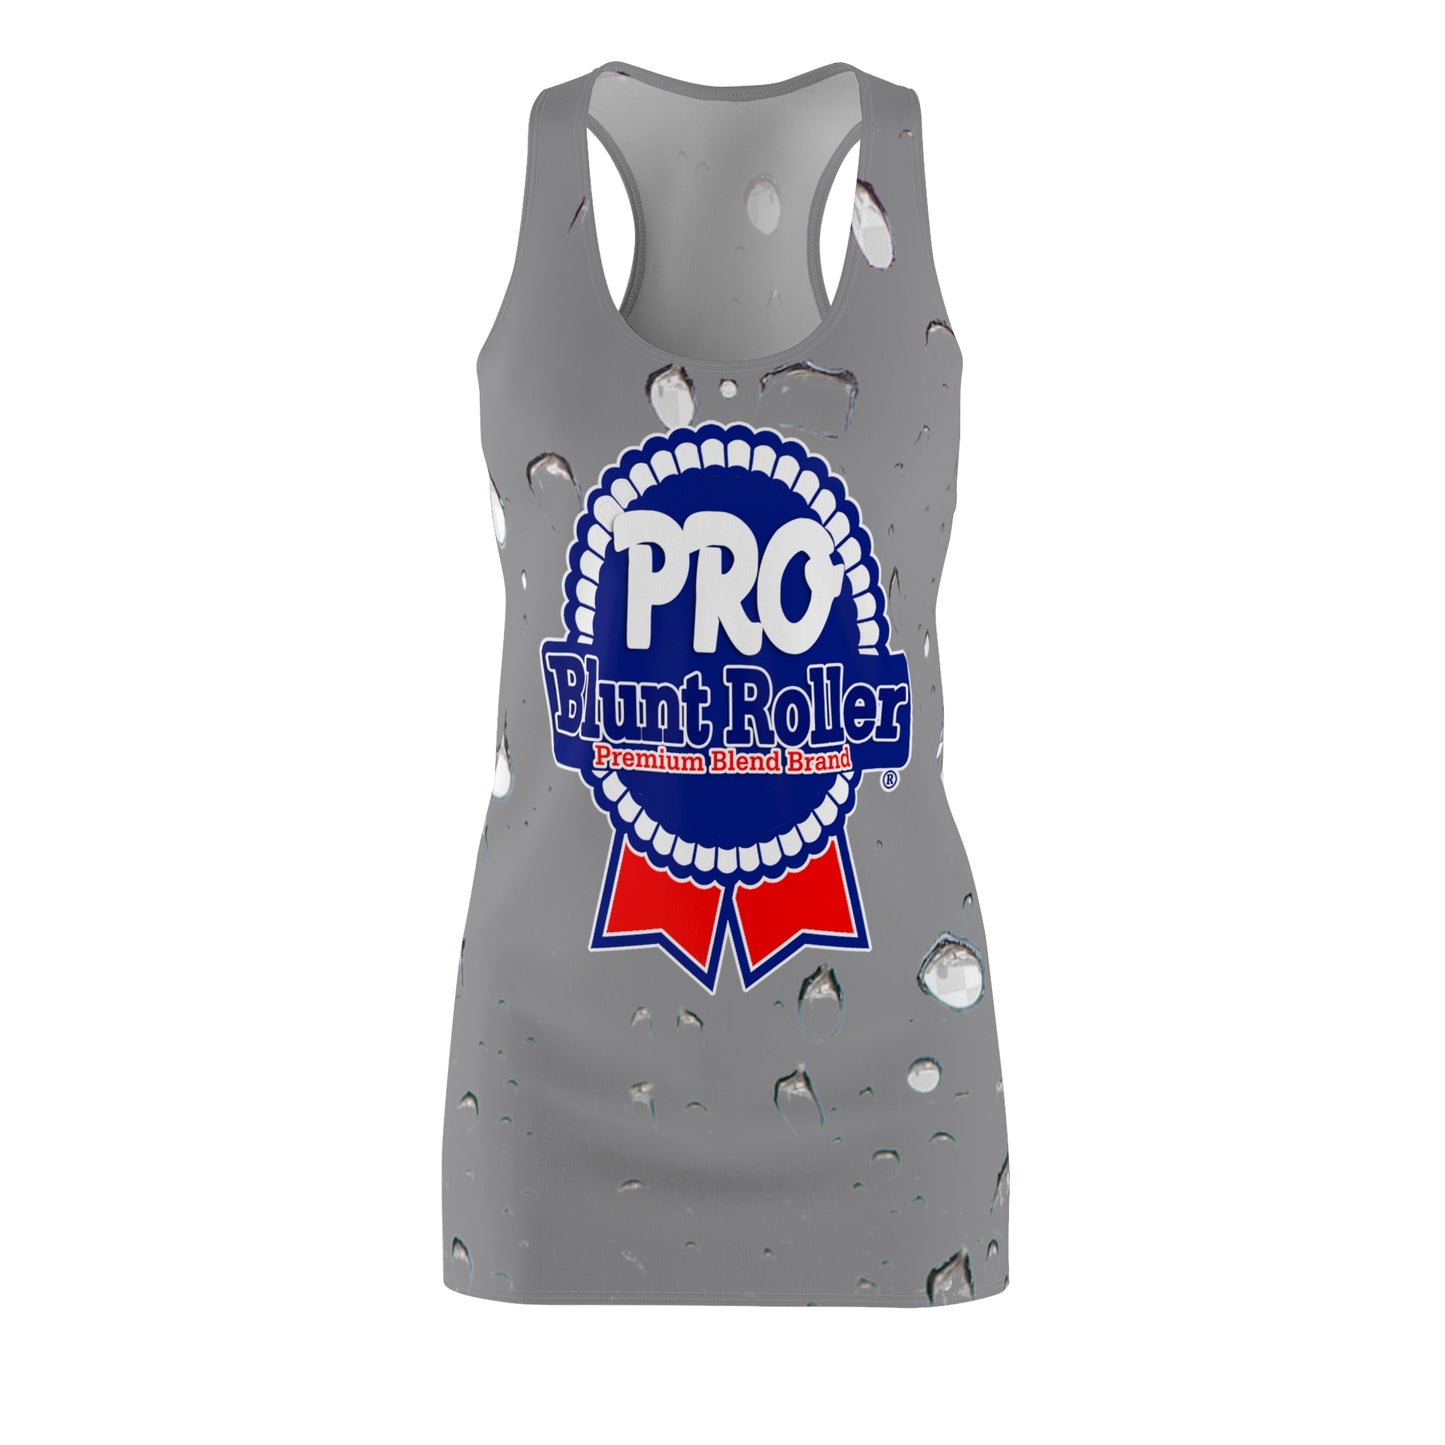 PBR Beer Can Dress